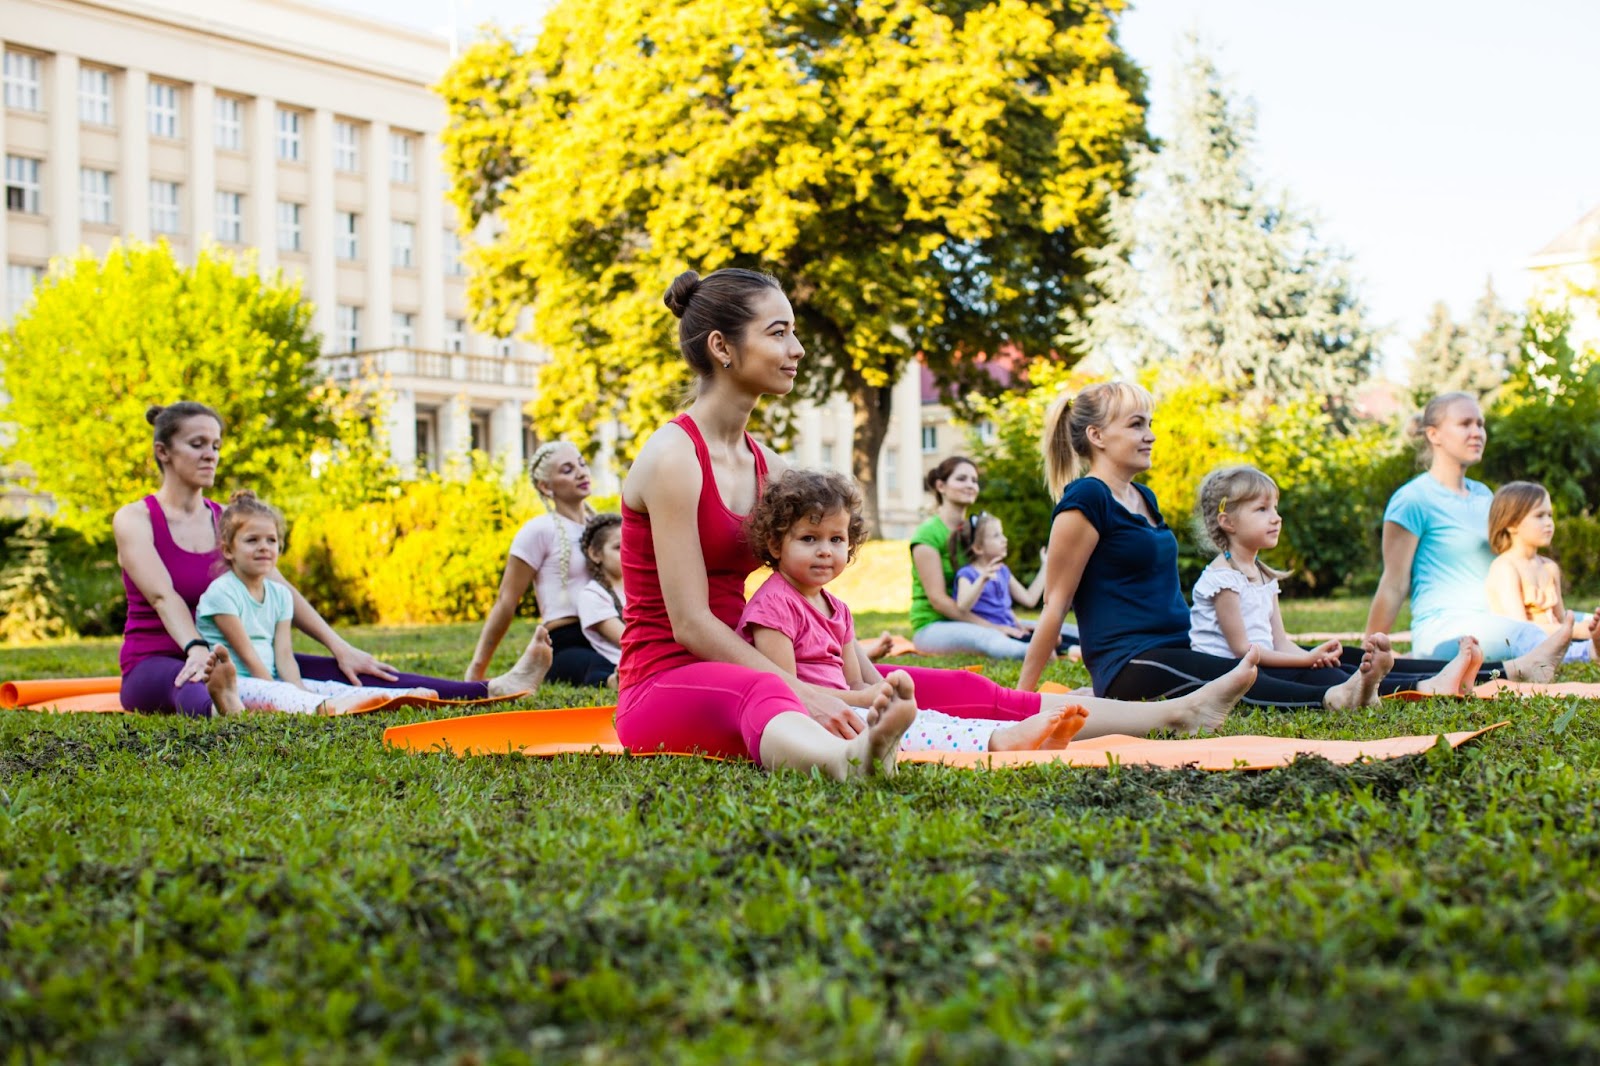 Group of young women taking a Mommy & Me yoga class in the park